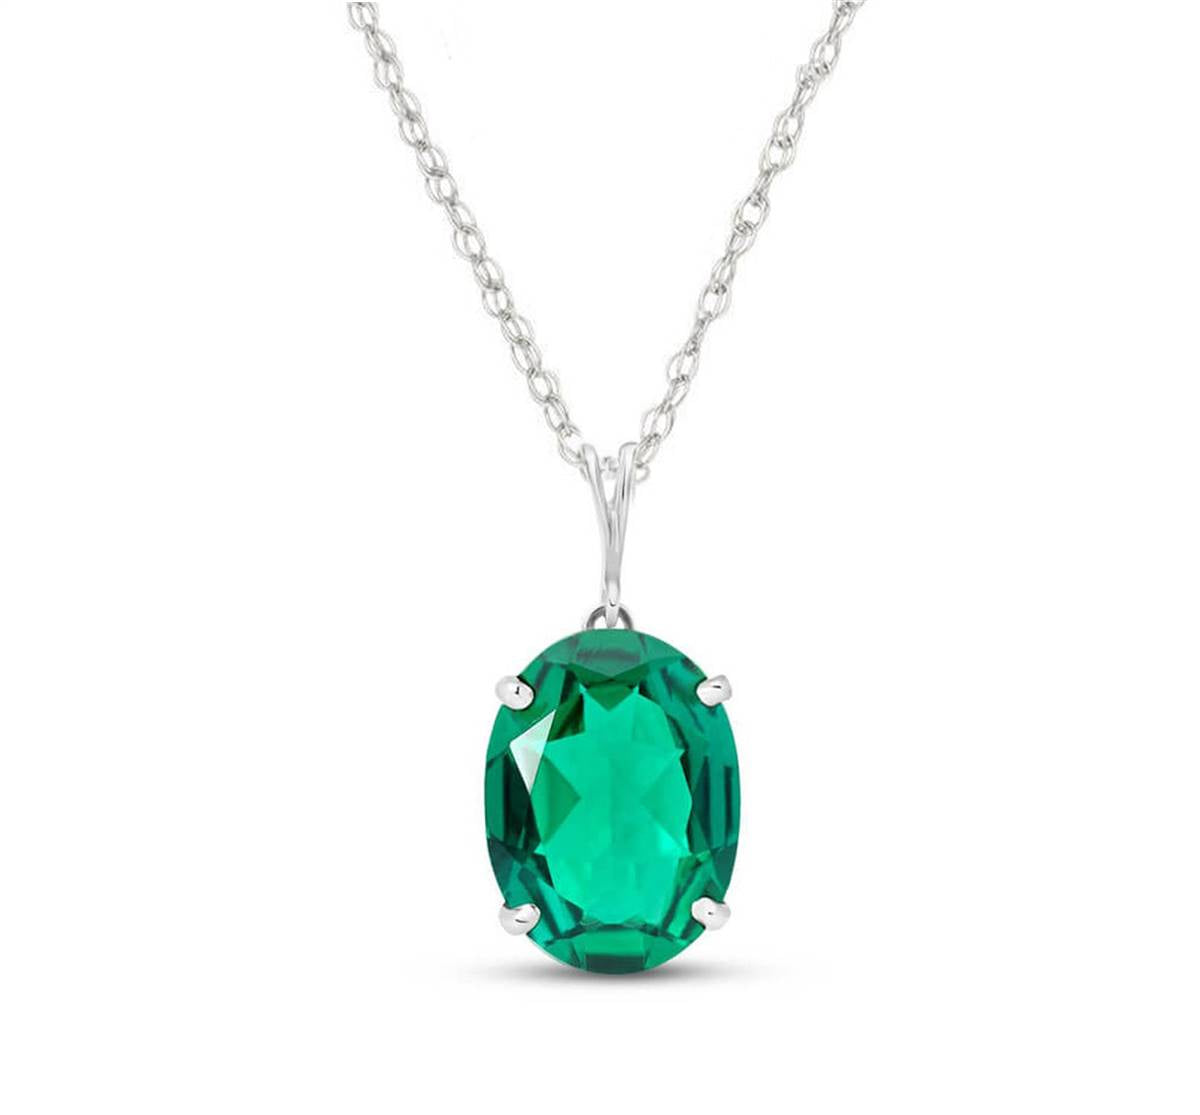 14K Solid White Gold Necklace With Oval Shape 4.5 ctw High Polished Genuine Emerald - Grade AAA